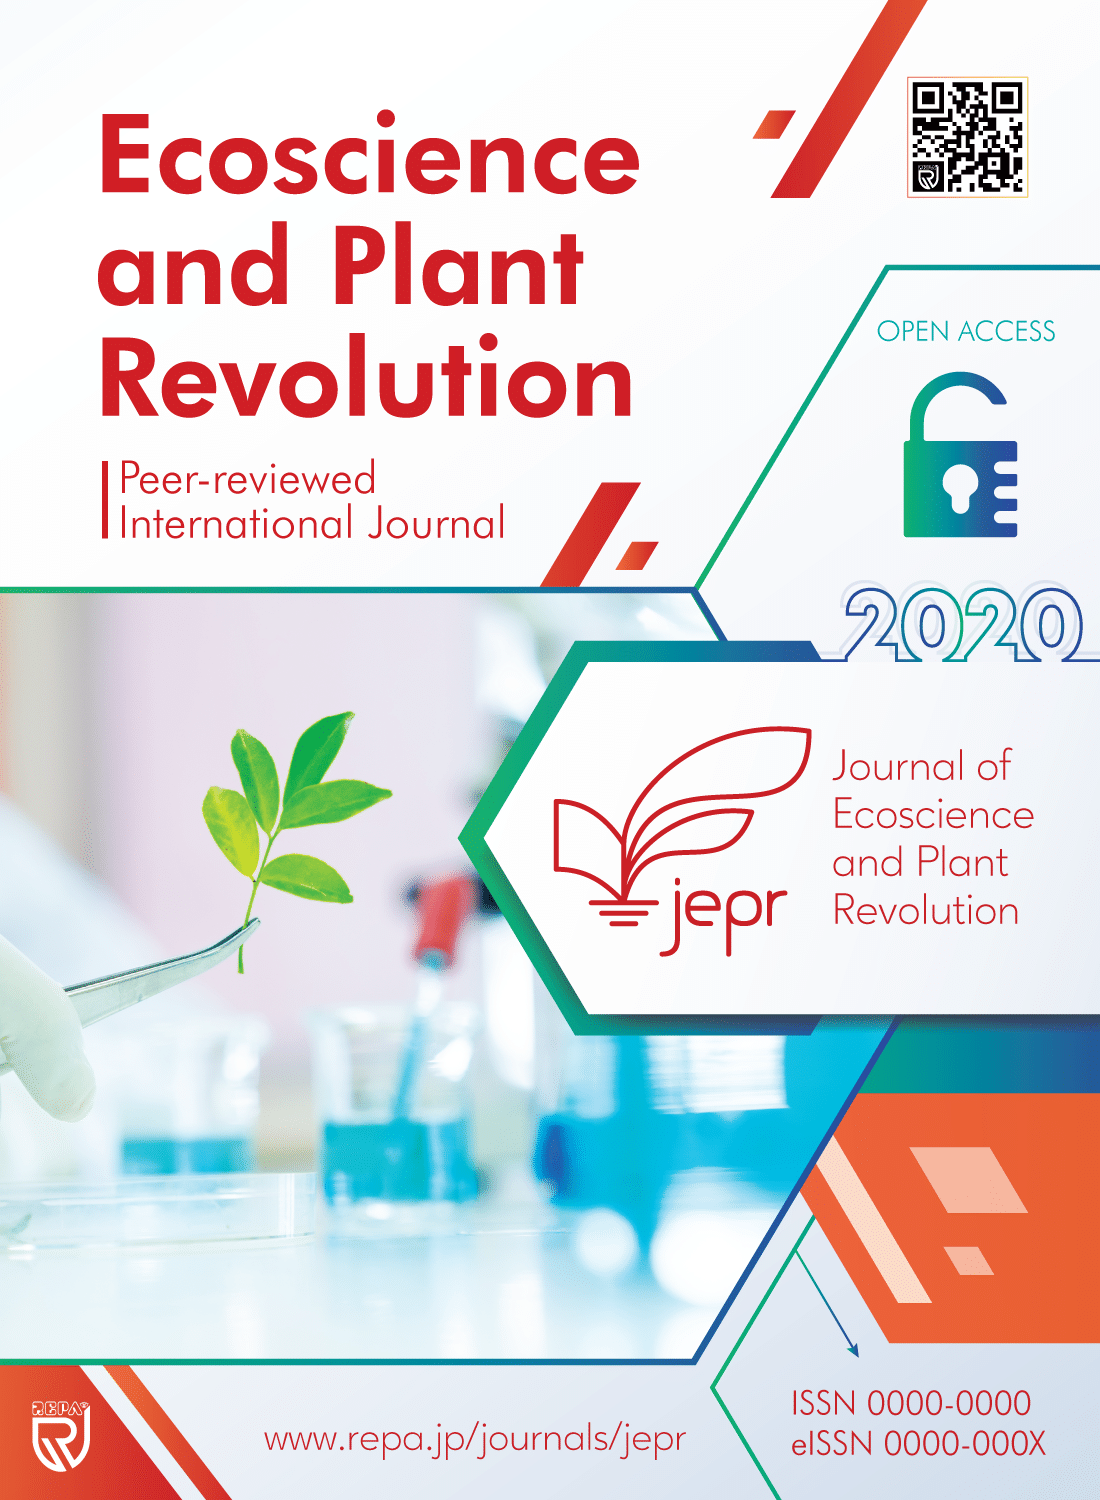 Journal of Ecoscience and Plant Revolution - JEPR